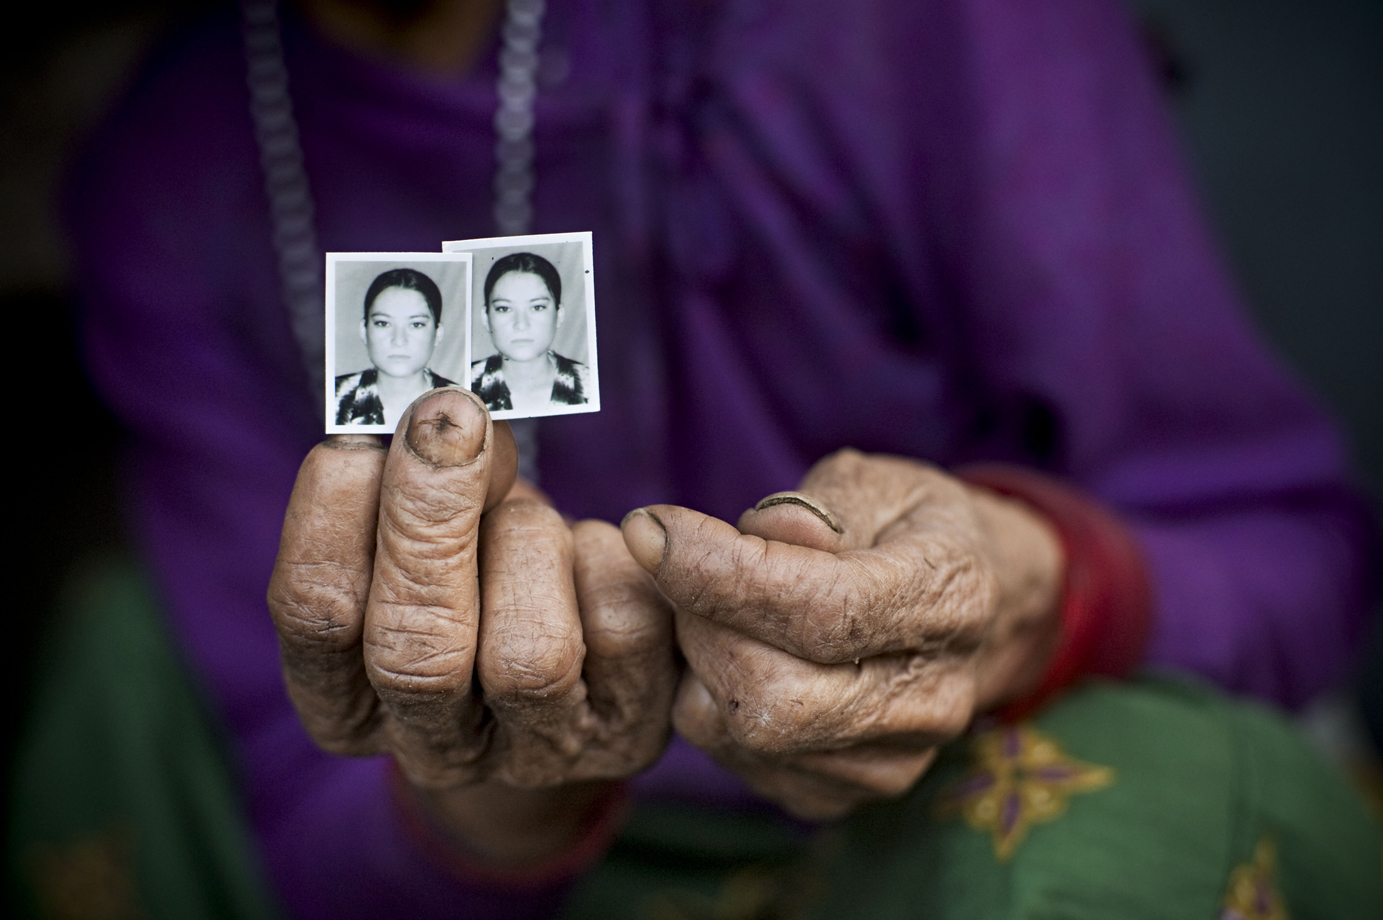  Picture of abducted female in remote village in Nepal - 2009 